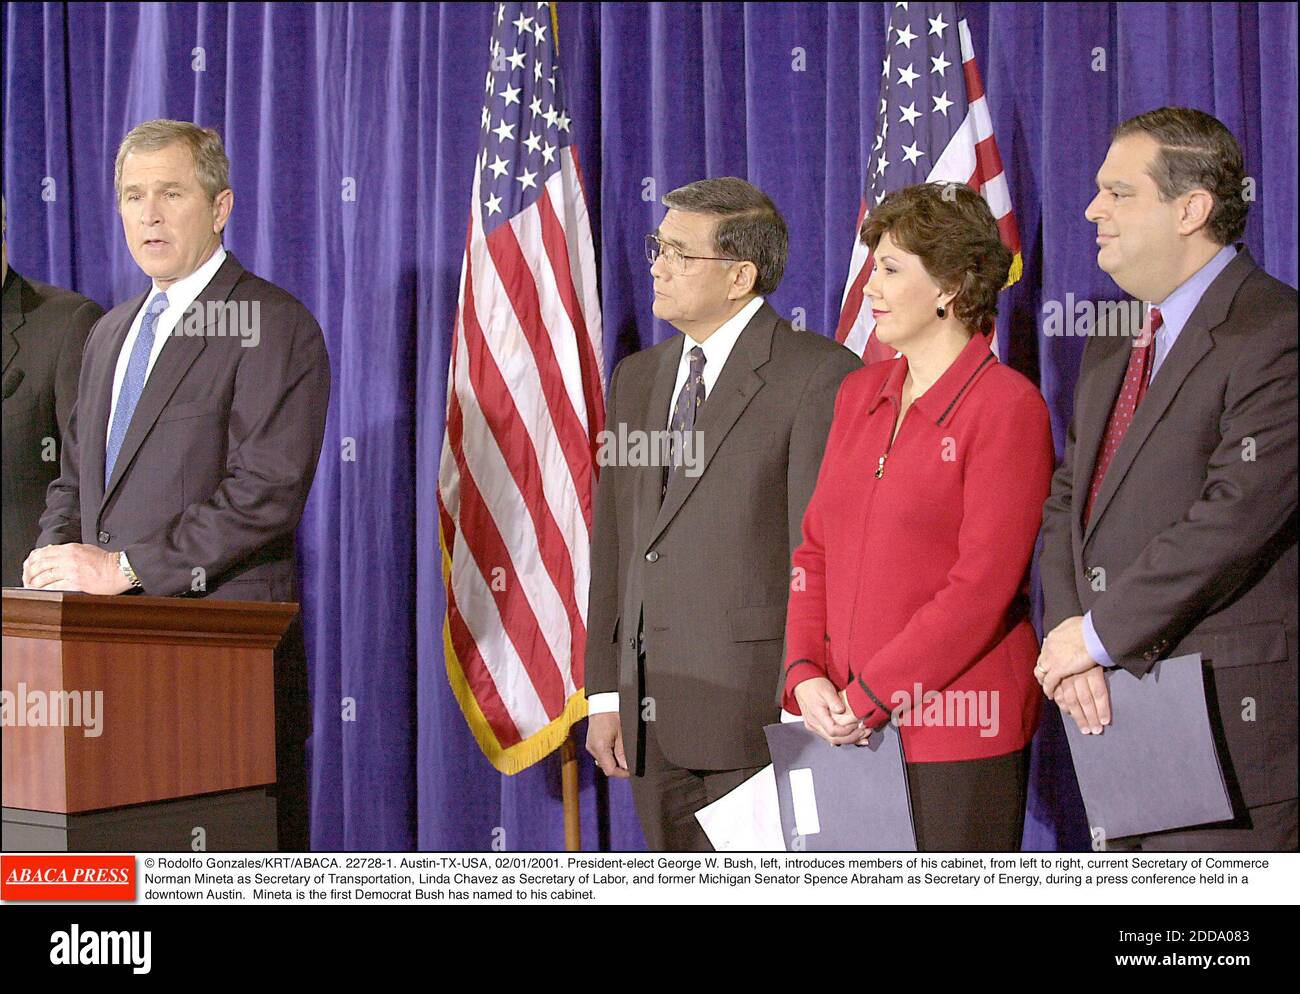 NO FILM, NO VIDEO, NO TV, NO DOCUMENTARY - © Rodolfo Gonzales/KRT/ABACA. 22728-1. Austin-TX-USA, 02/01/2001. President-elect George W. Bush, left, introduces members of his cabinet, from left to right, current Secretary of Commerce Norman Mineta as Secretary of Transportation, Linda Chavez as Secr Stock Photo